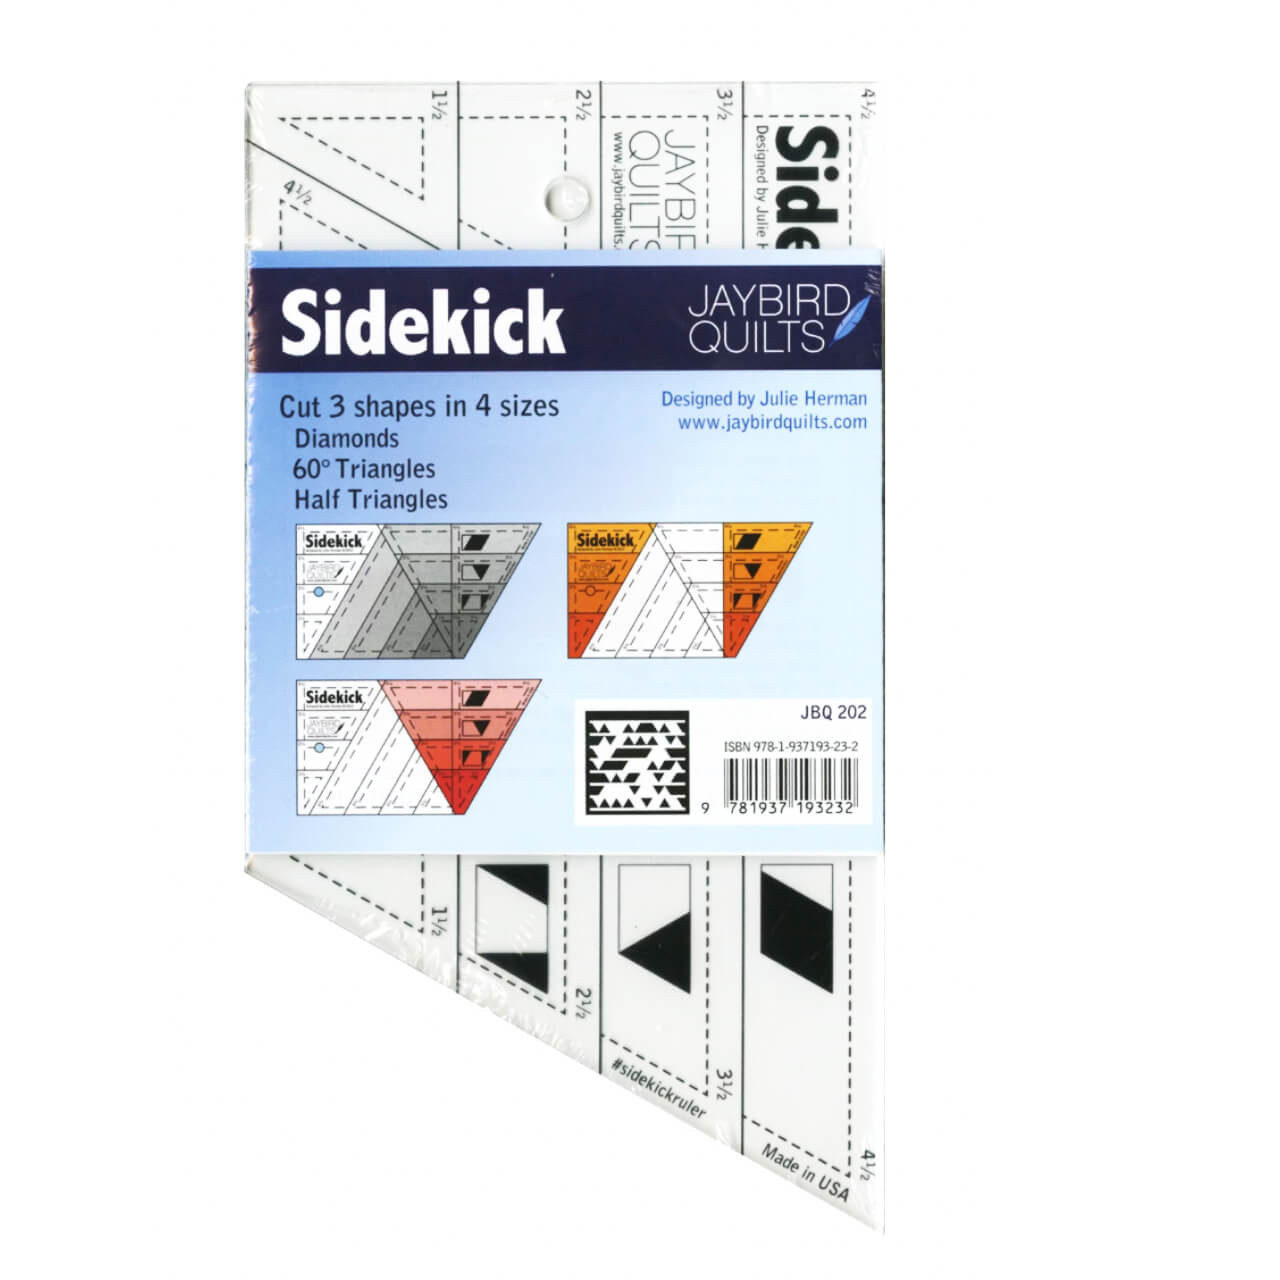 The image showcases the Sidekick Ruler by Jaybird Quilts, highlighting its packaging which features diagrams of the diamonds and triangles it can cut, along with the ruler's measurement details and the distinctive Jaybird Quilts branding.